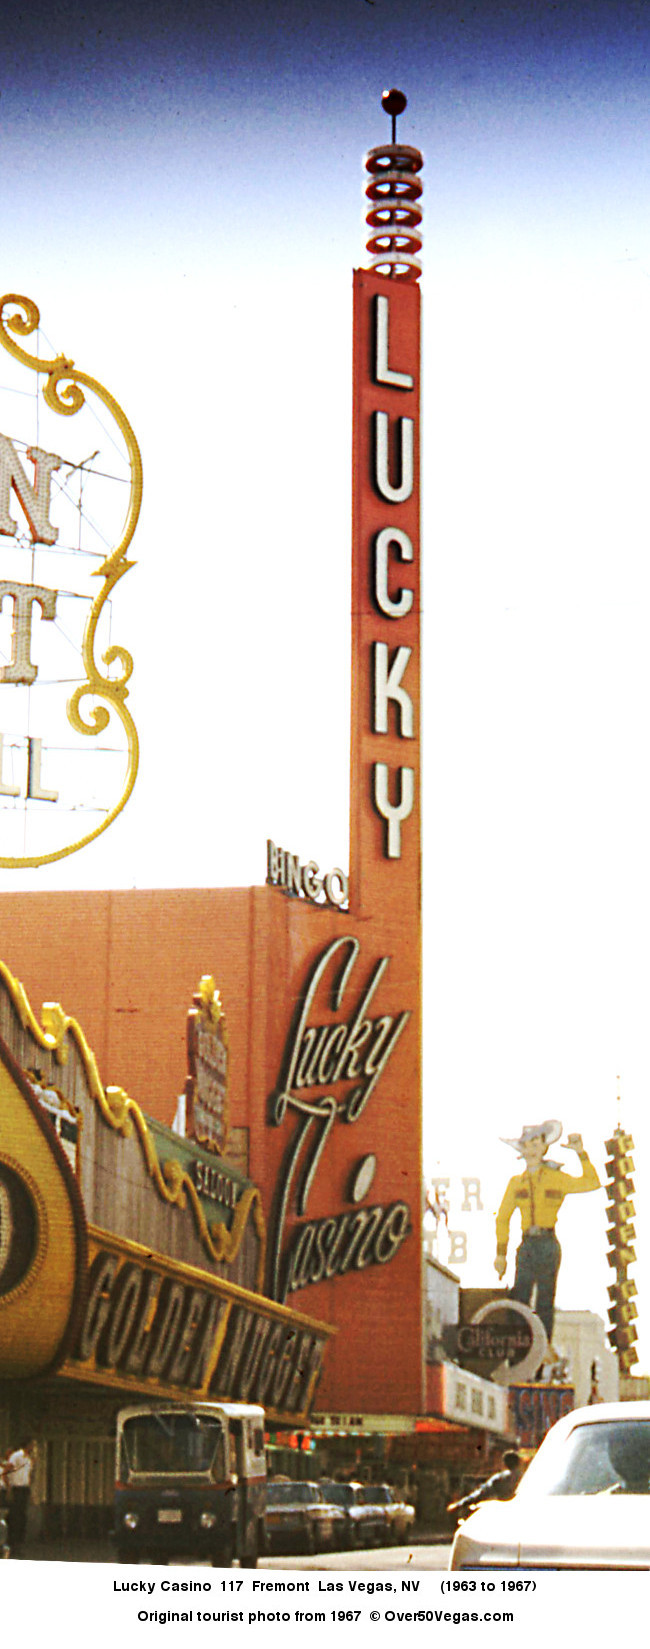 When the Lucky Casino sign  was erected by the Young Electric Sign company in 1963 it weighed in at 60 tons, had three miles of neon tubing, and more than 11,000 lamps.